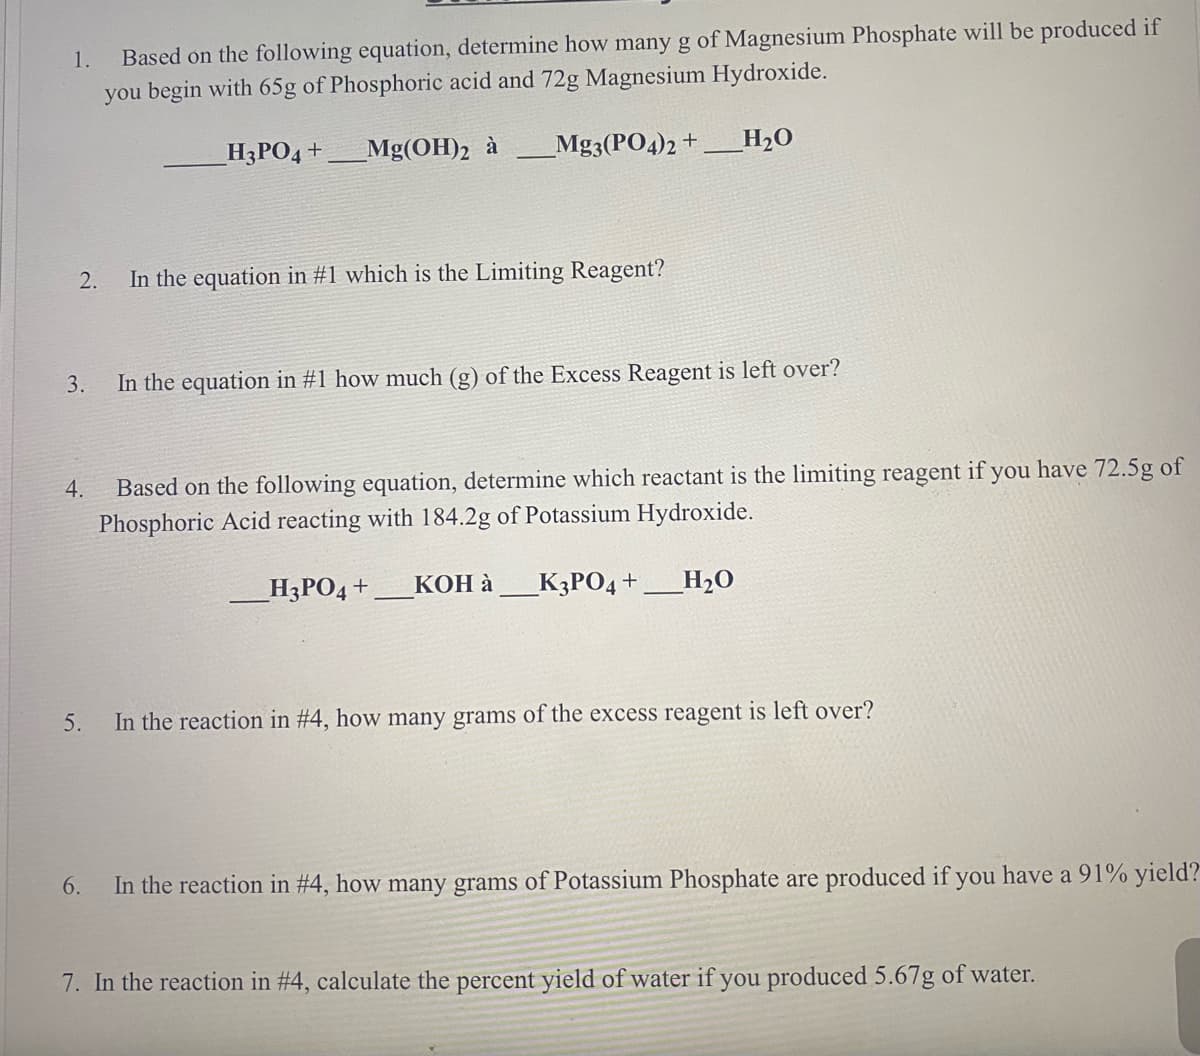 Based on the following equation, determine how many g of Magnesium Phosphate will be produced if
you begin with 65g of Phosphoric acid and 72g Magnesium Hydroxide.
1.
H3PO4 +
Mg(OH)2 à
_Mg3(PO4)2 +
H2O
2.
In the equation in #1 which is the Limiting Reagent?
3.
In the equation in #1 how much (g) of the Excess Reagent is left over?
Based on the following equation, determine which reactant is the limiting reagent if you have 72.5g of
Phosphoric Acid reacting with 184.2g of Potassium Hydroxide.
4.
_H3PO4+
КОН а
_K3PO4 +
H2O
5.
In the reaction in #4, how many grams of the excess reagent is left over?
6.
In the reaction in #4, how many grams of Potassium Phosphate are produced if you have a 91% yield?
7. In the reaction in #4, calculate the percent yield of water if you produced 5.67g of water.
